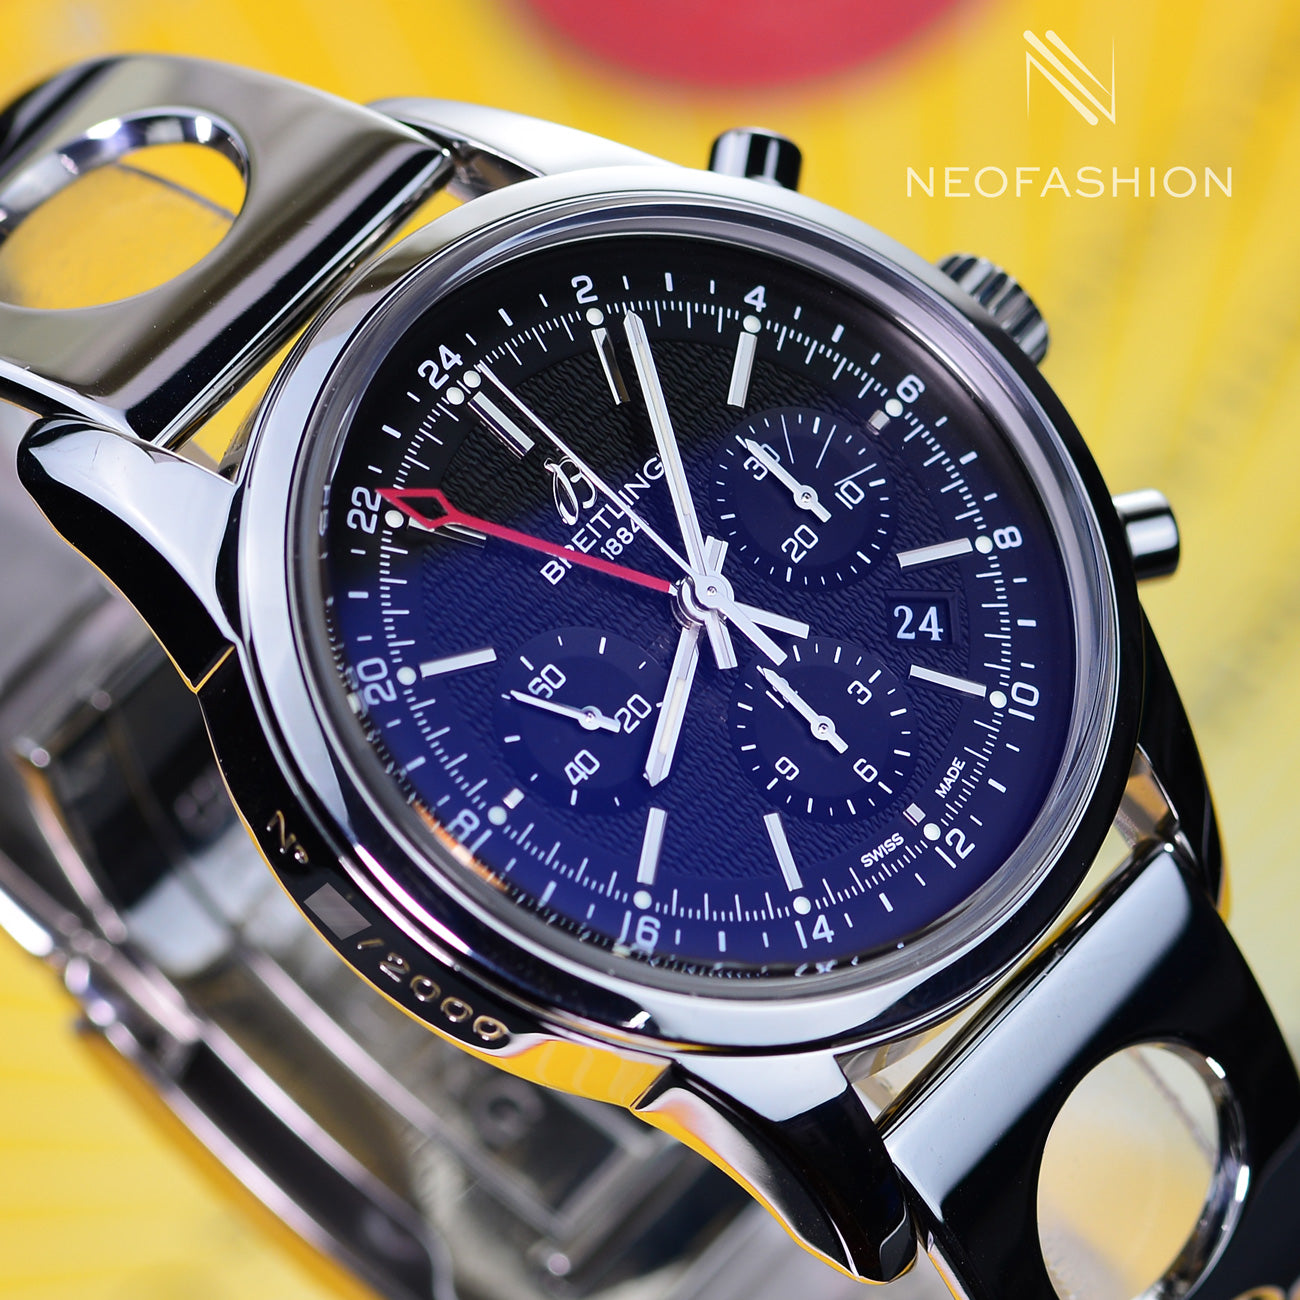 Breitling Transocean Chronograph GMT Watch Review, News